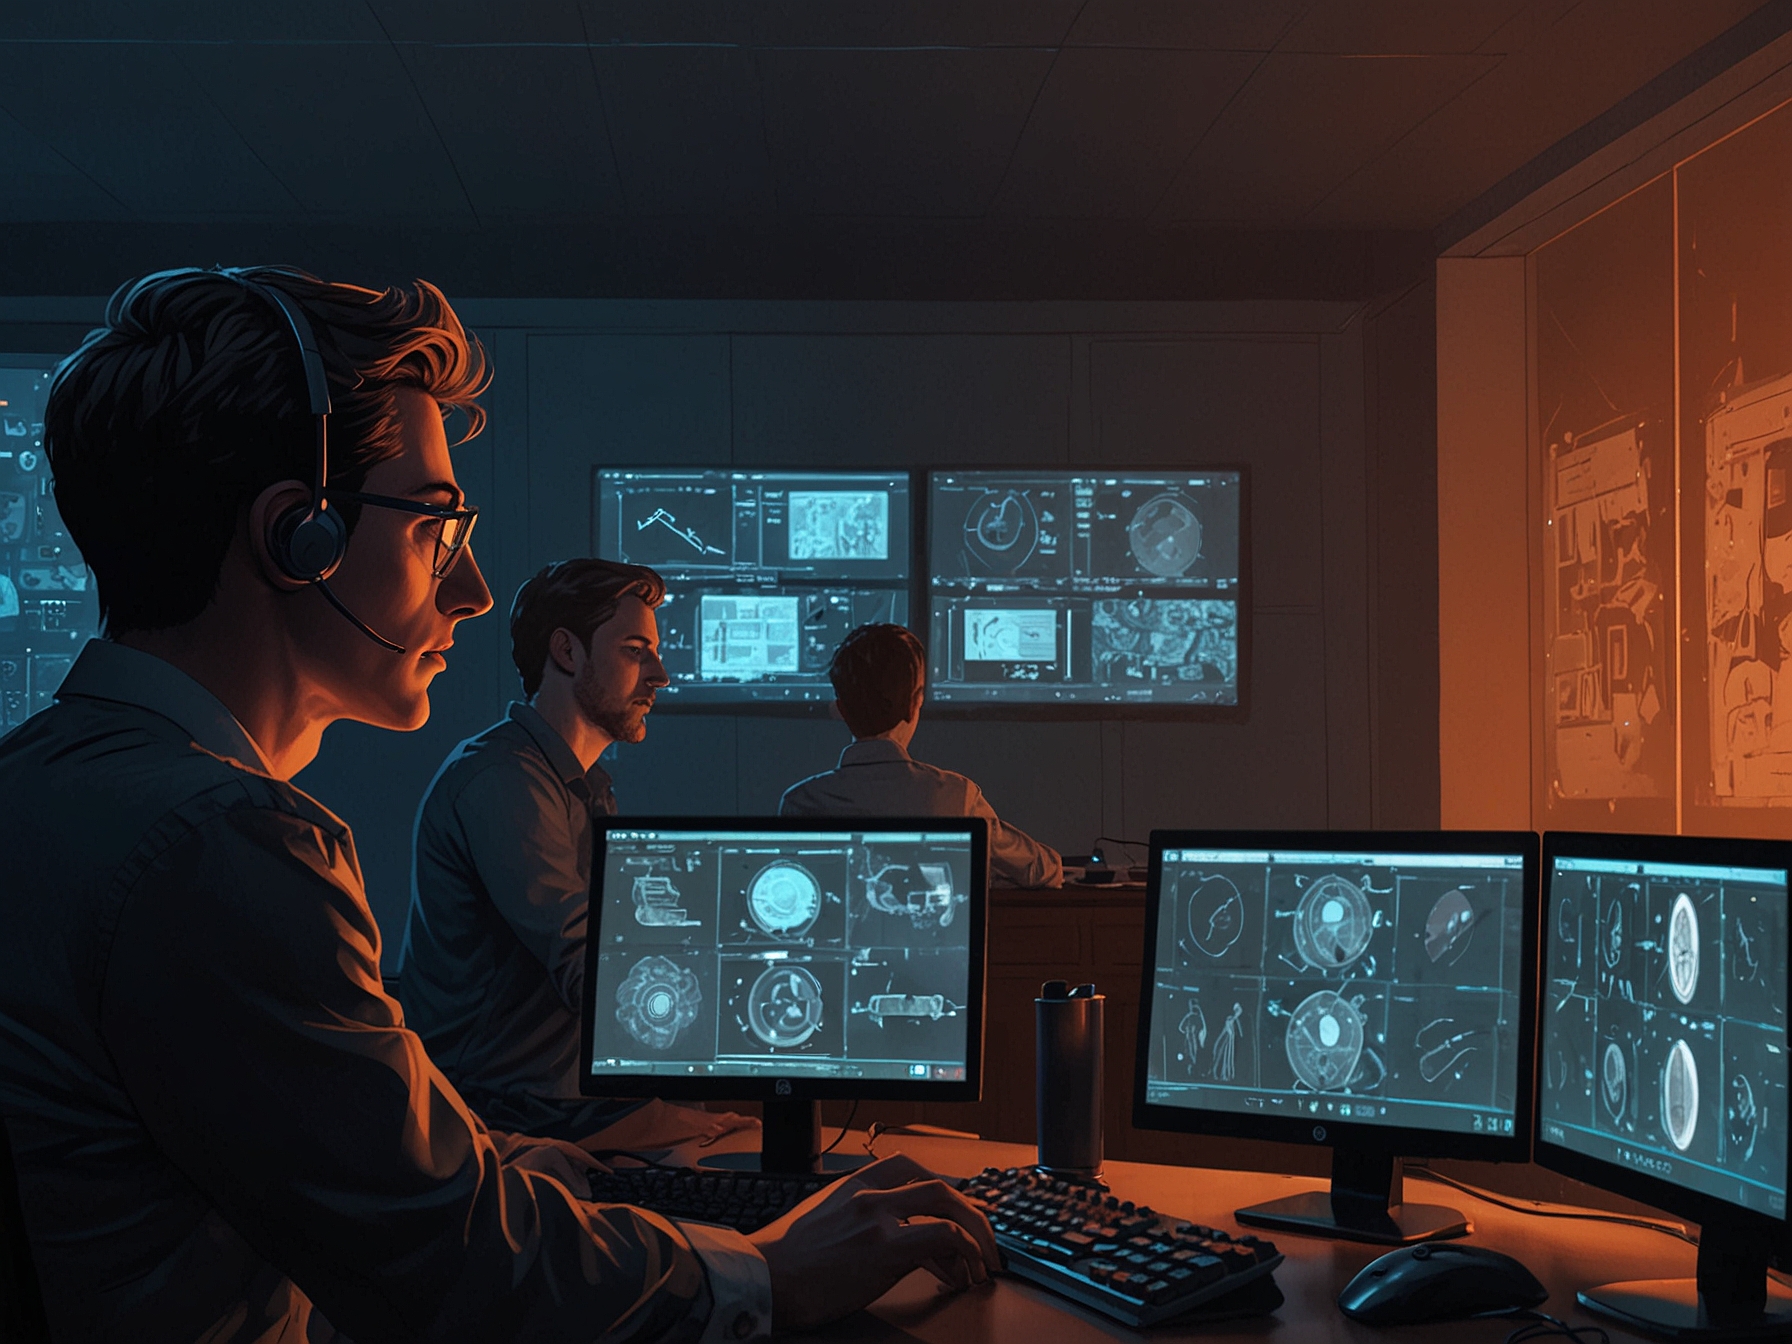 An advanced surveillance room with AI-powered monitors analyzing housemates' interactions, predicting conflicts and alliances, adding a new layer of strategy to the game.